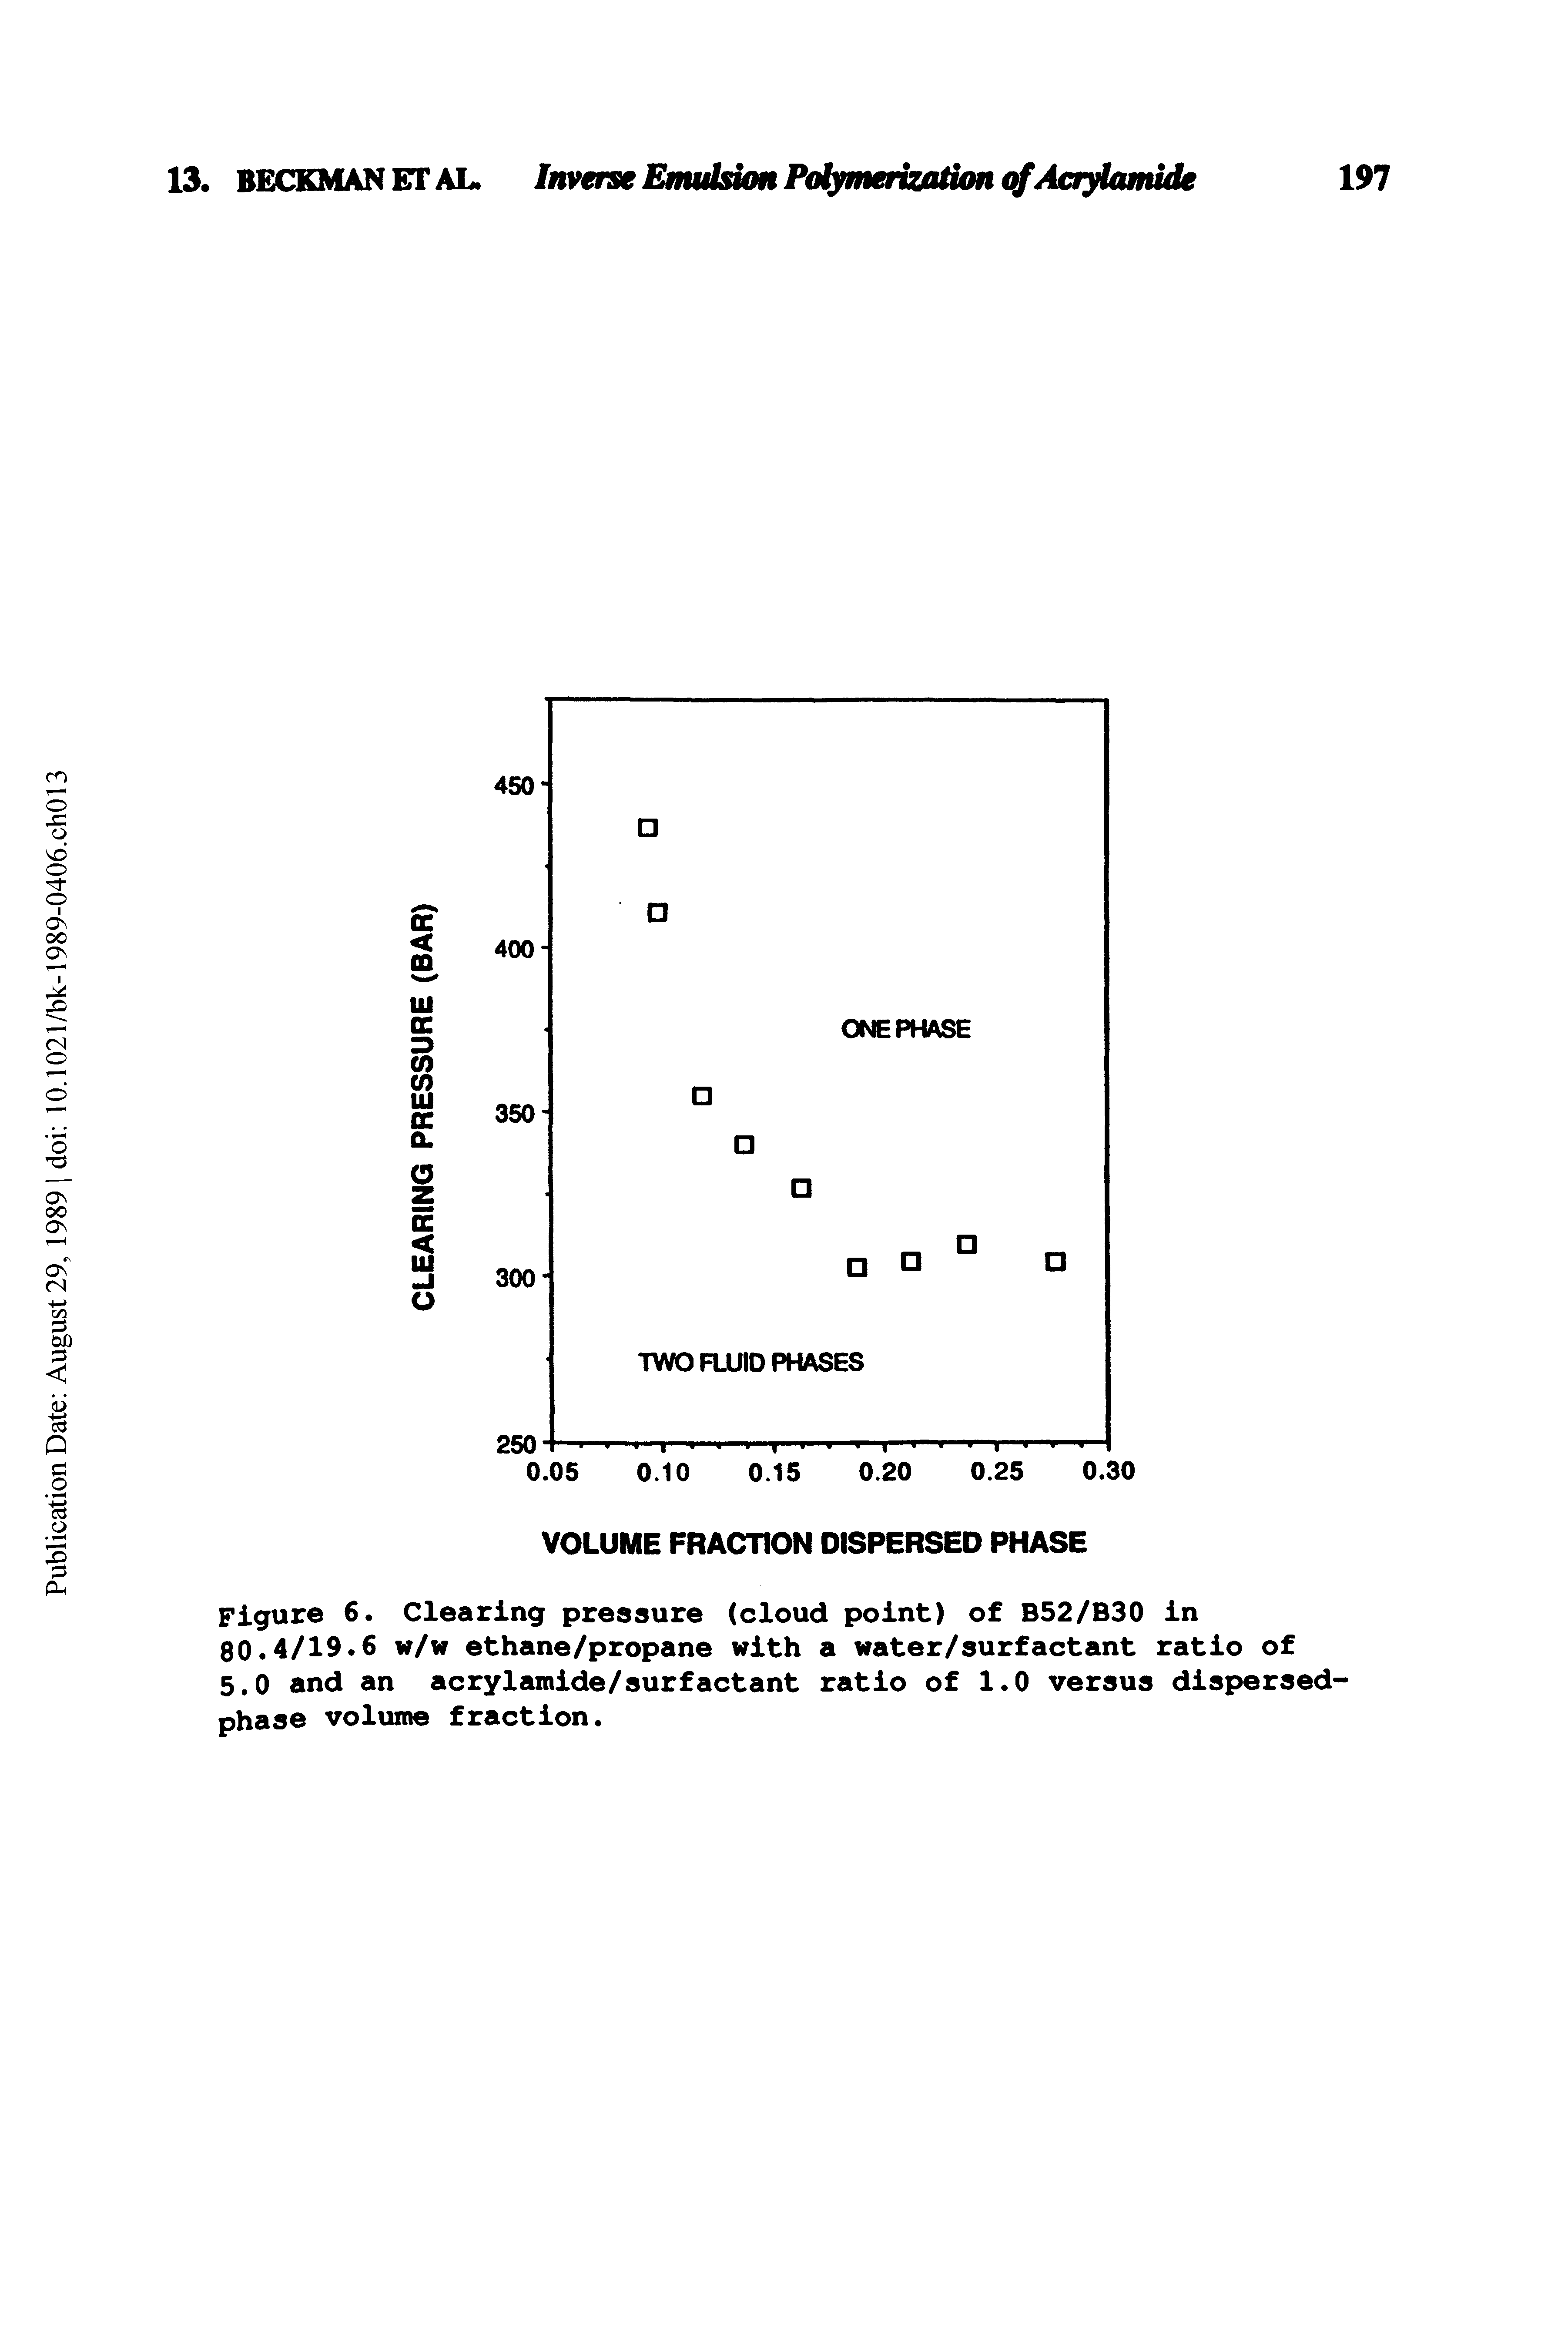 Figure 6. Clearing pressure (cloud point) of B52/B30 In 80.4/19.6 w/w ethane/propane with a water/surfactant ratio of 5.0 and an acrylamlde/surfactant ratio of 1.0 versus dispersed-phase volume fraction.